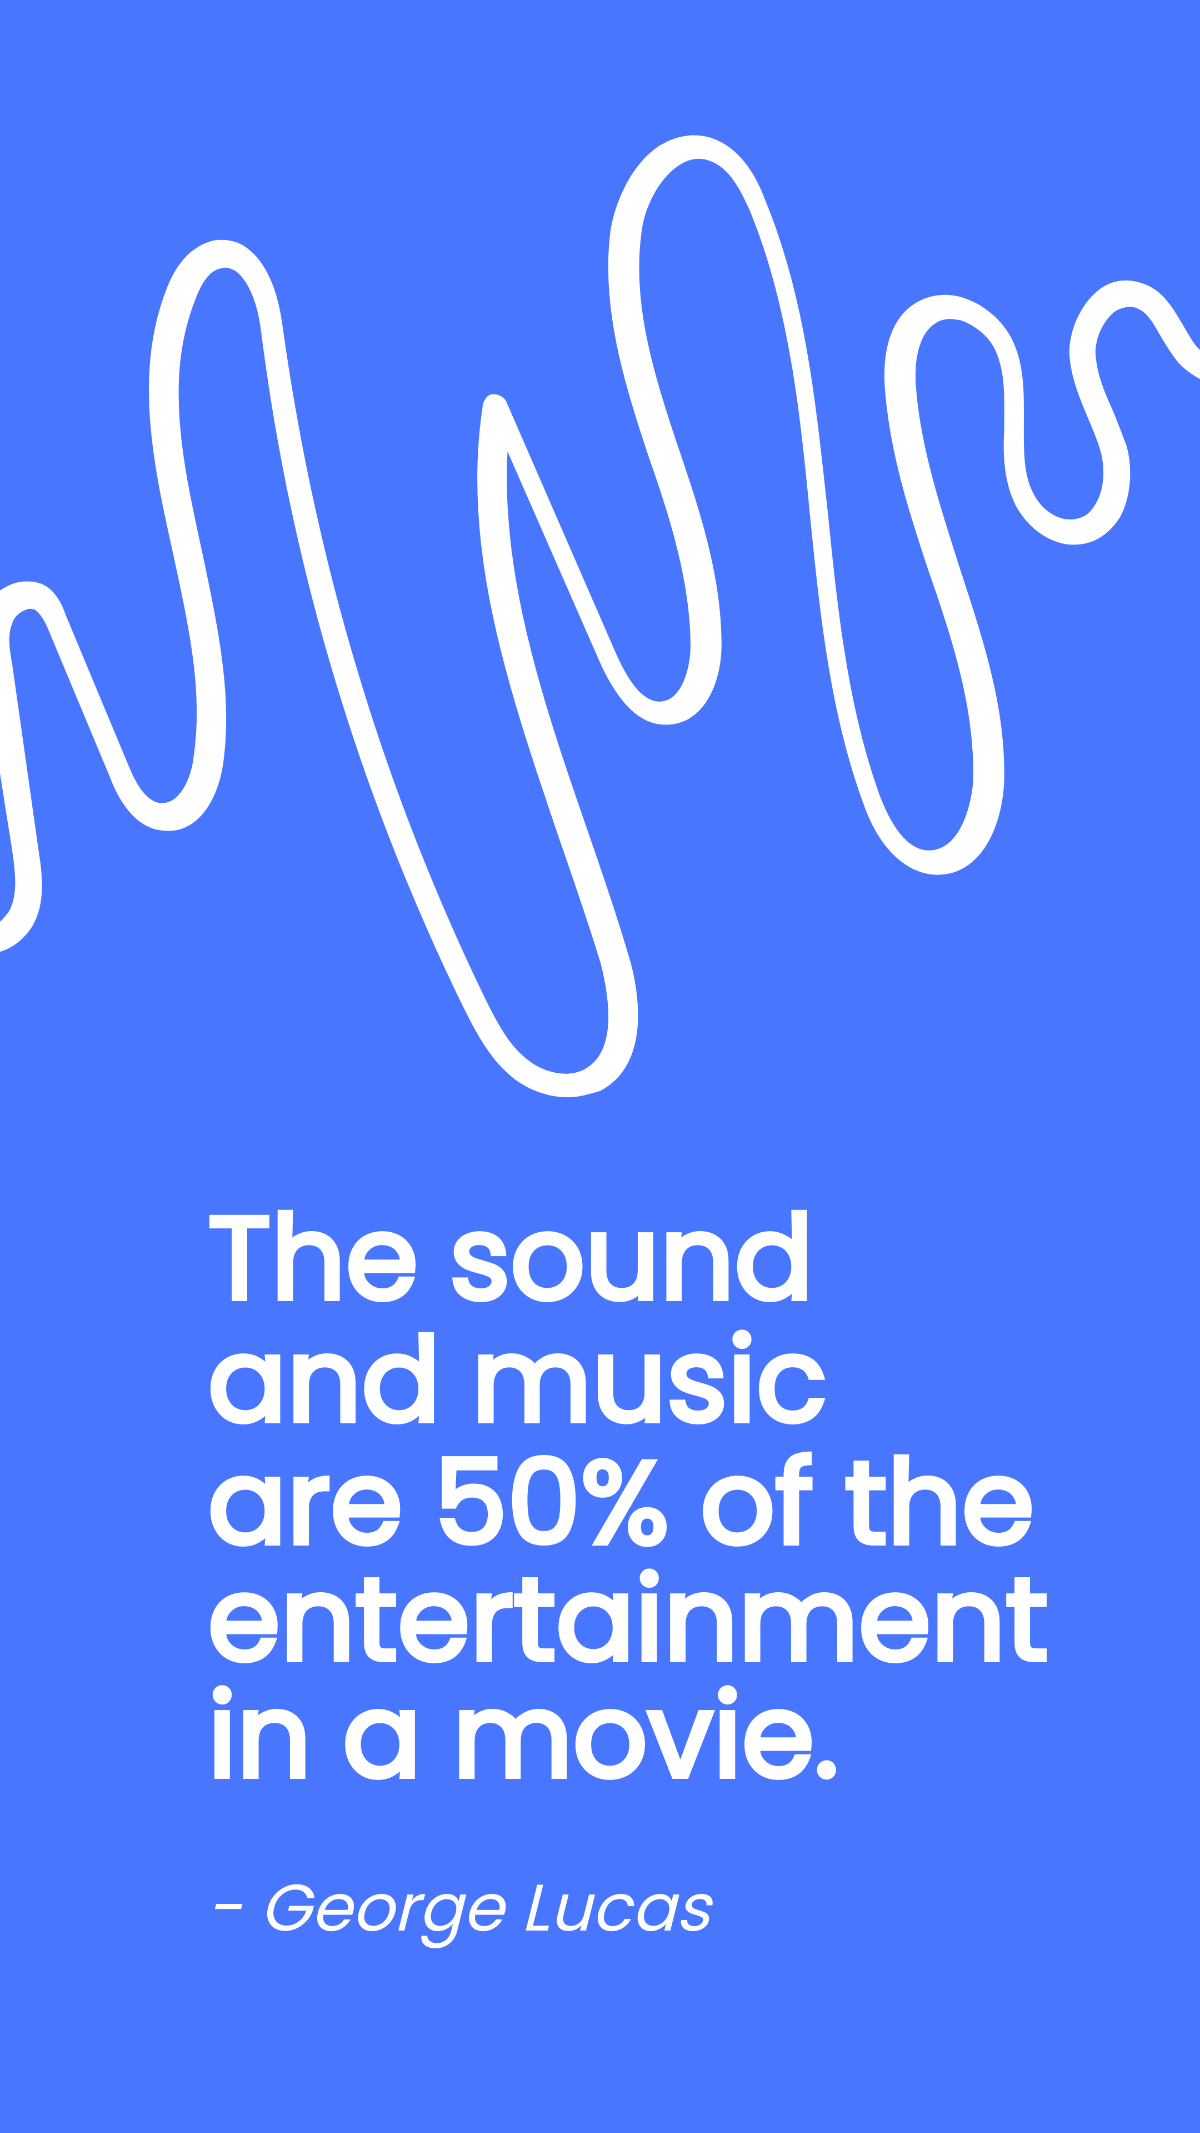 George Lucas - The sound and music are 50 of the entertainment in a movie. Template